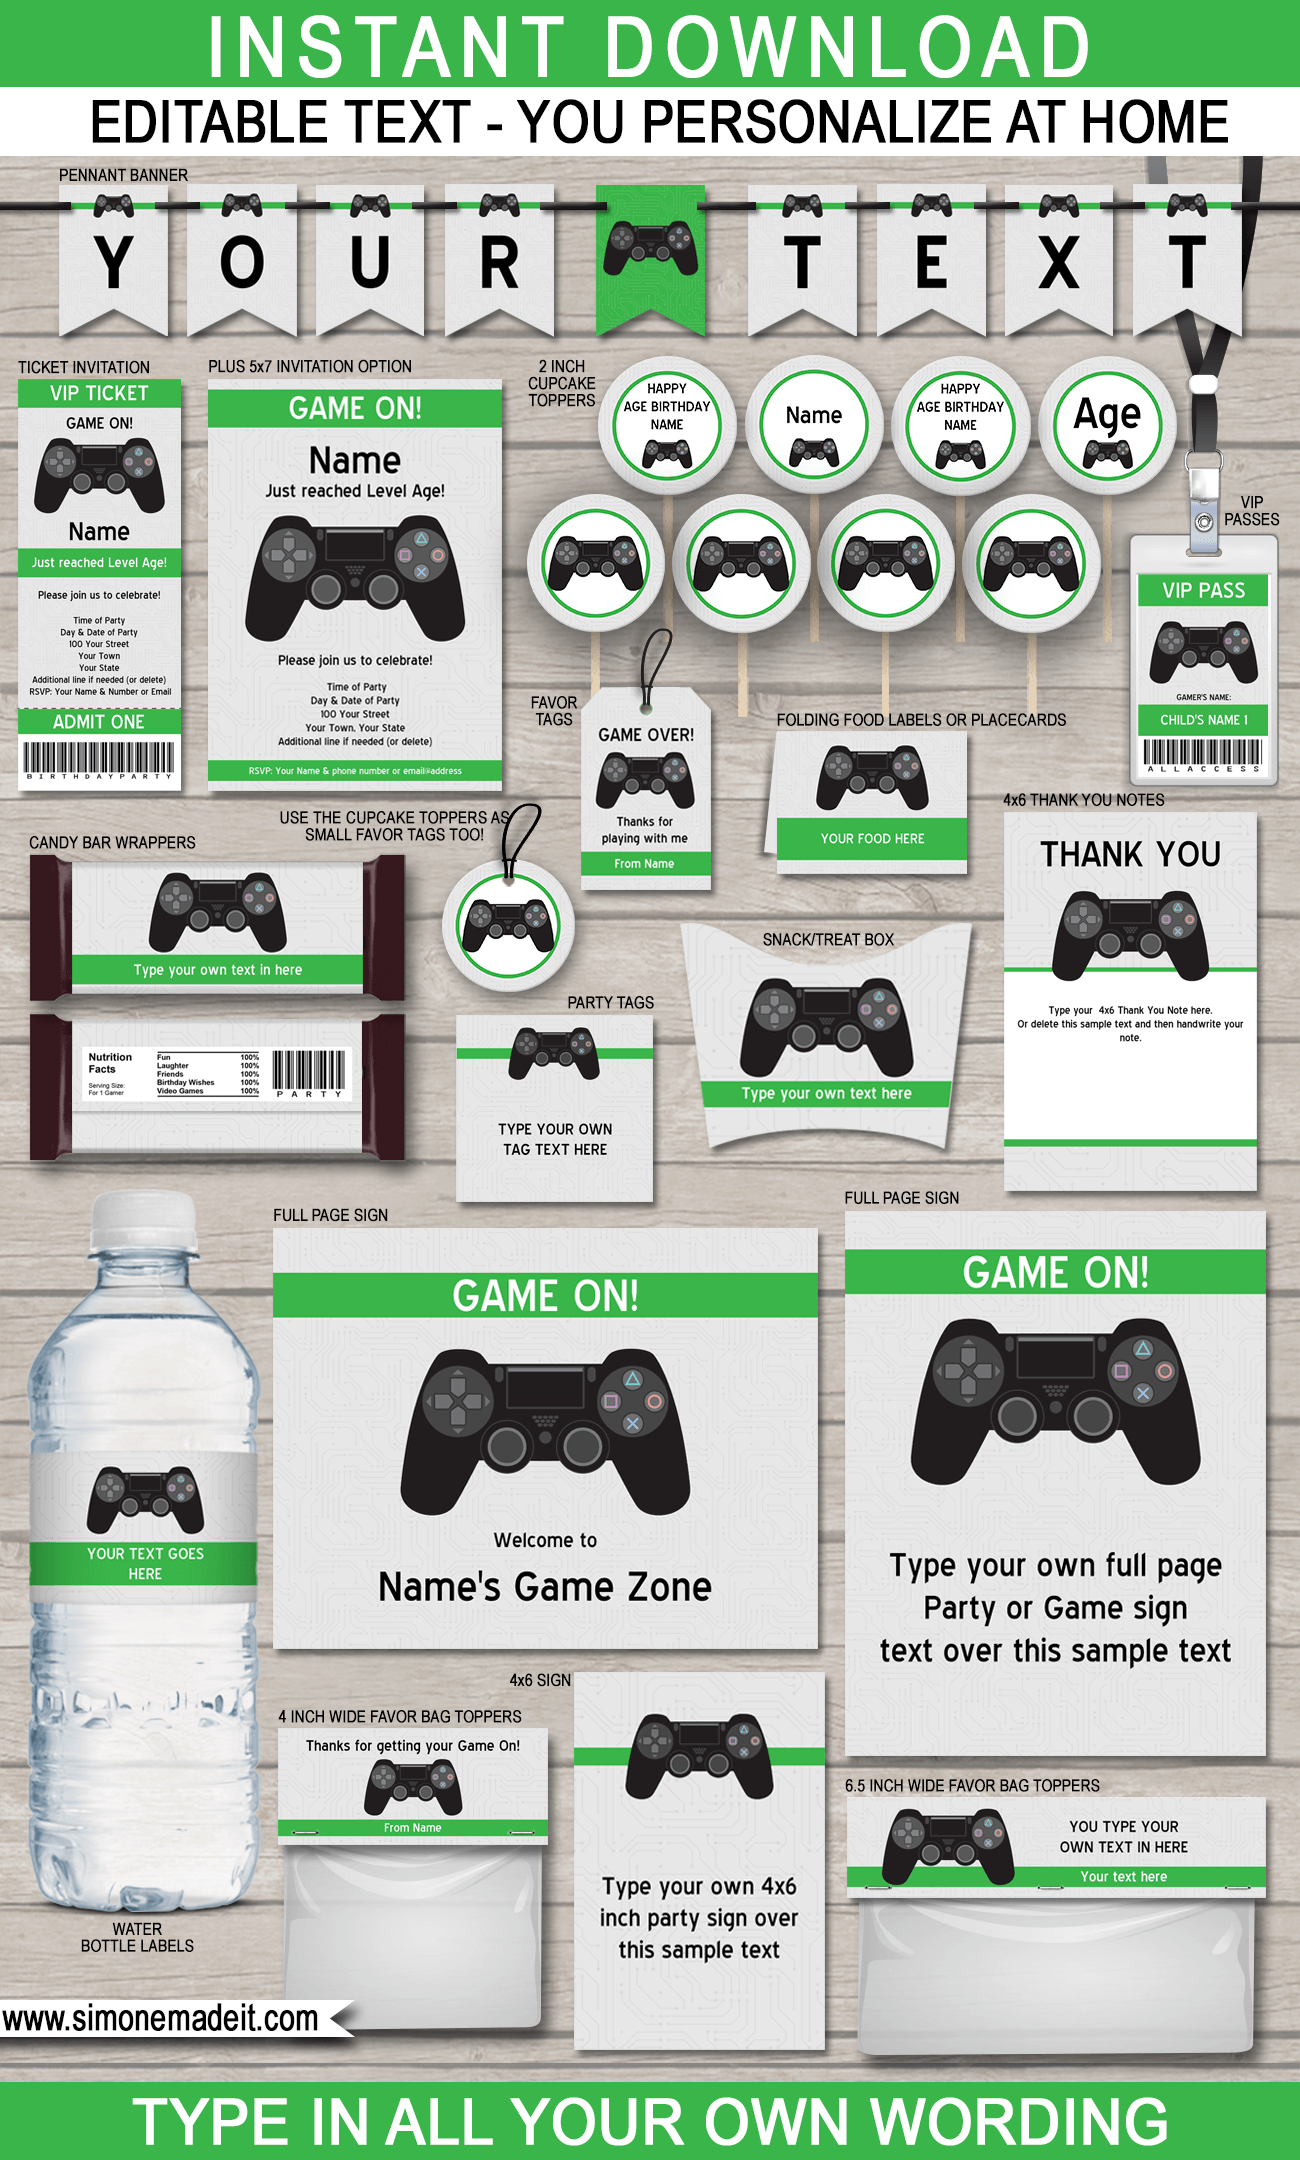 Playstation Party Printables, Invitations & Decorations - Video Game Theme Birthday Party - Black Playstation Controller - Gamer - Editable & Printable templates - INSTANT DOWNLOAD via simonemadeit.com